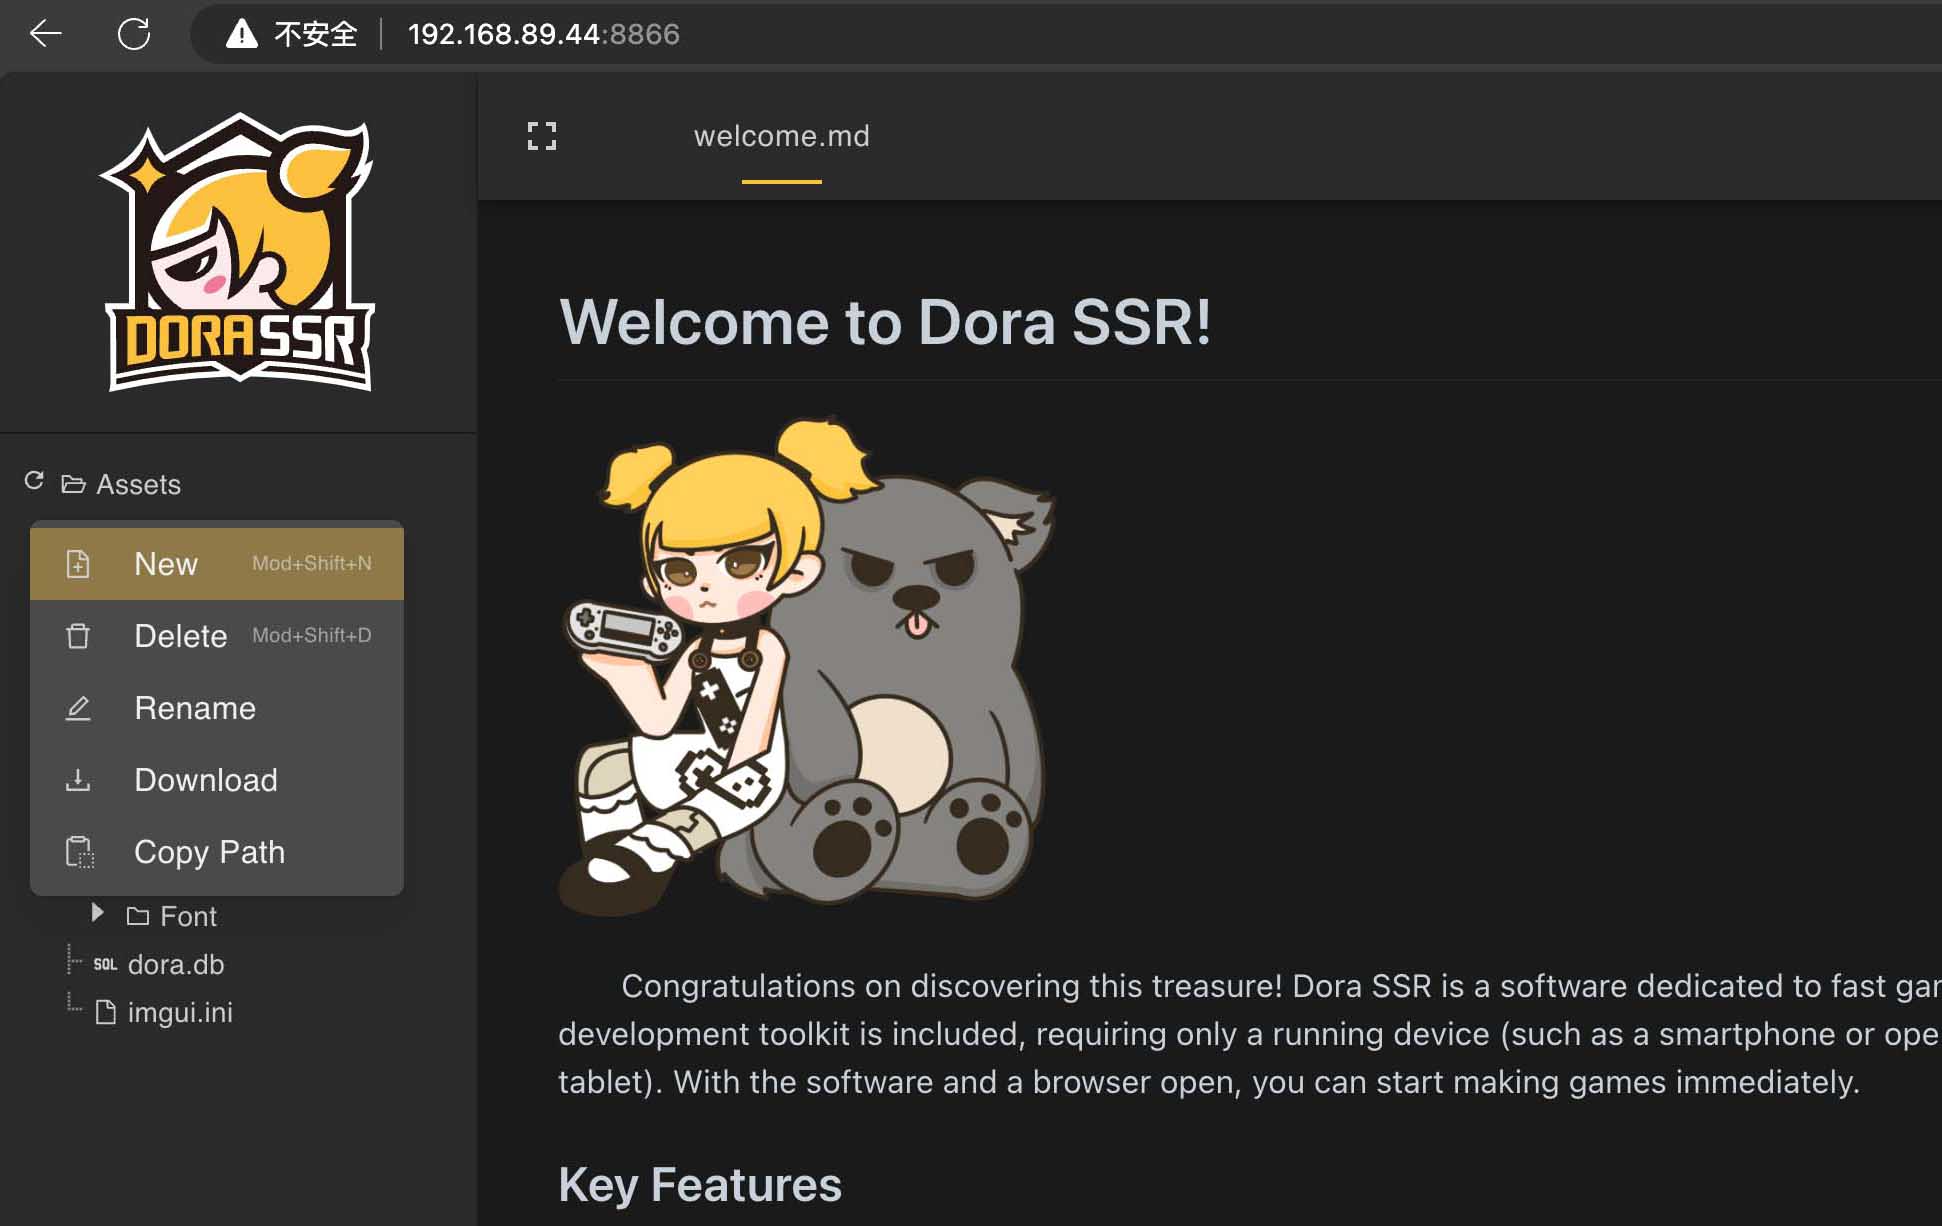 Accessing Dora SSR's Web IDE and creating a new folder in the browser